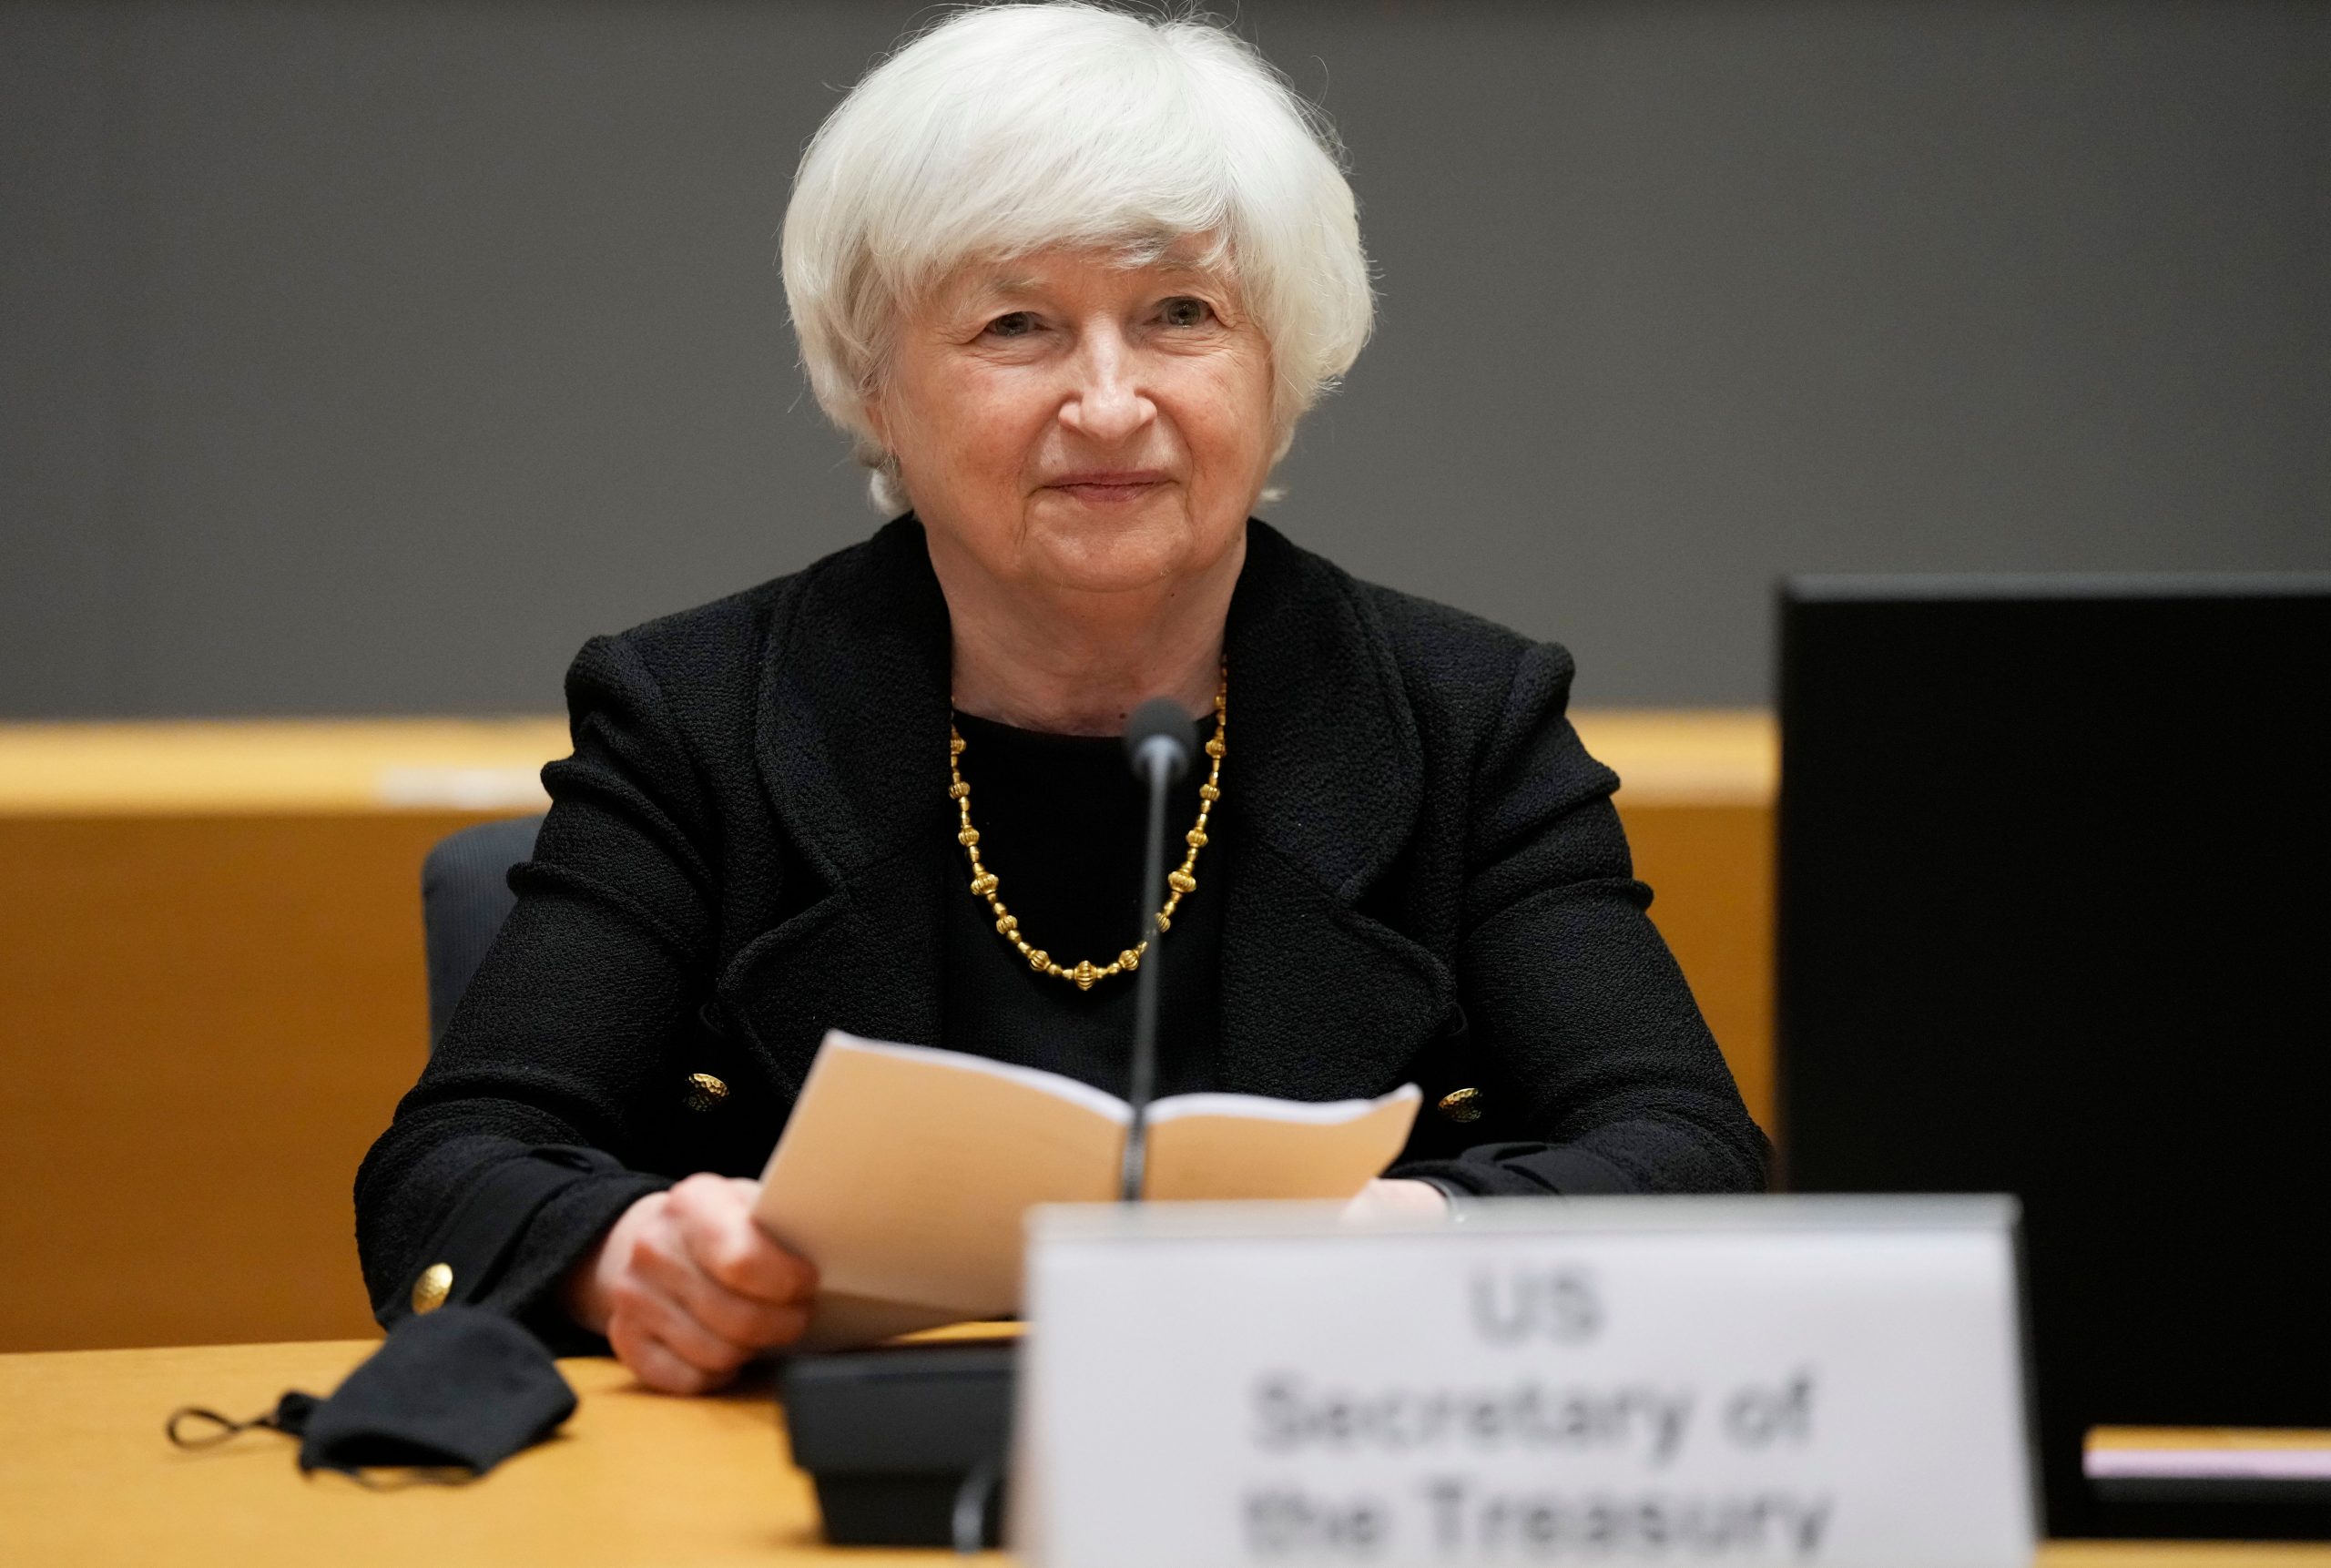 Janet Yellen explains why she was ‘wrong’ on inflation path